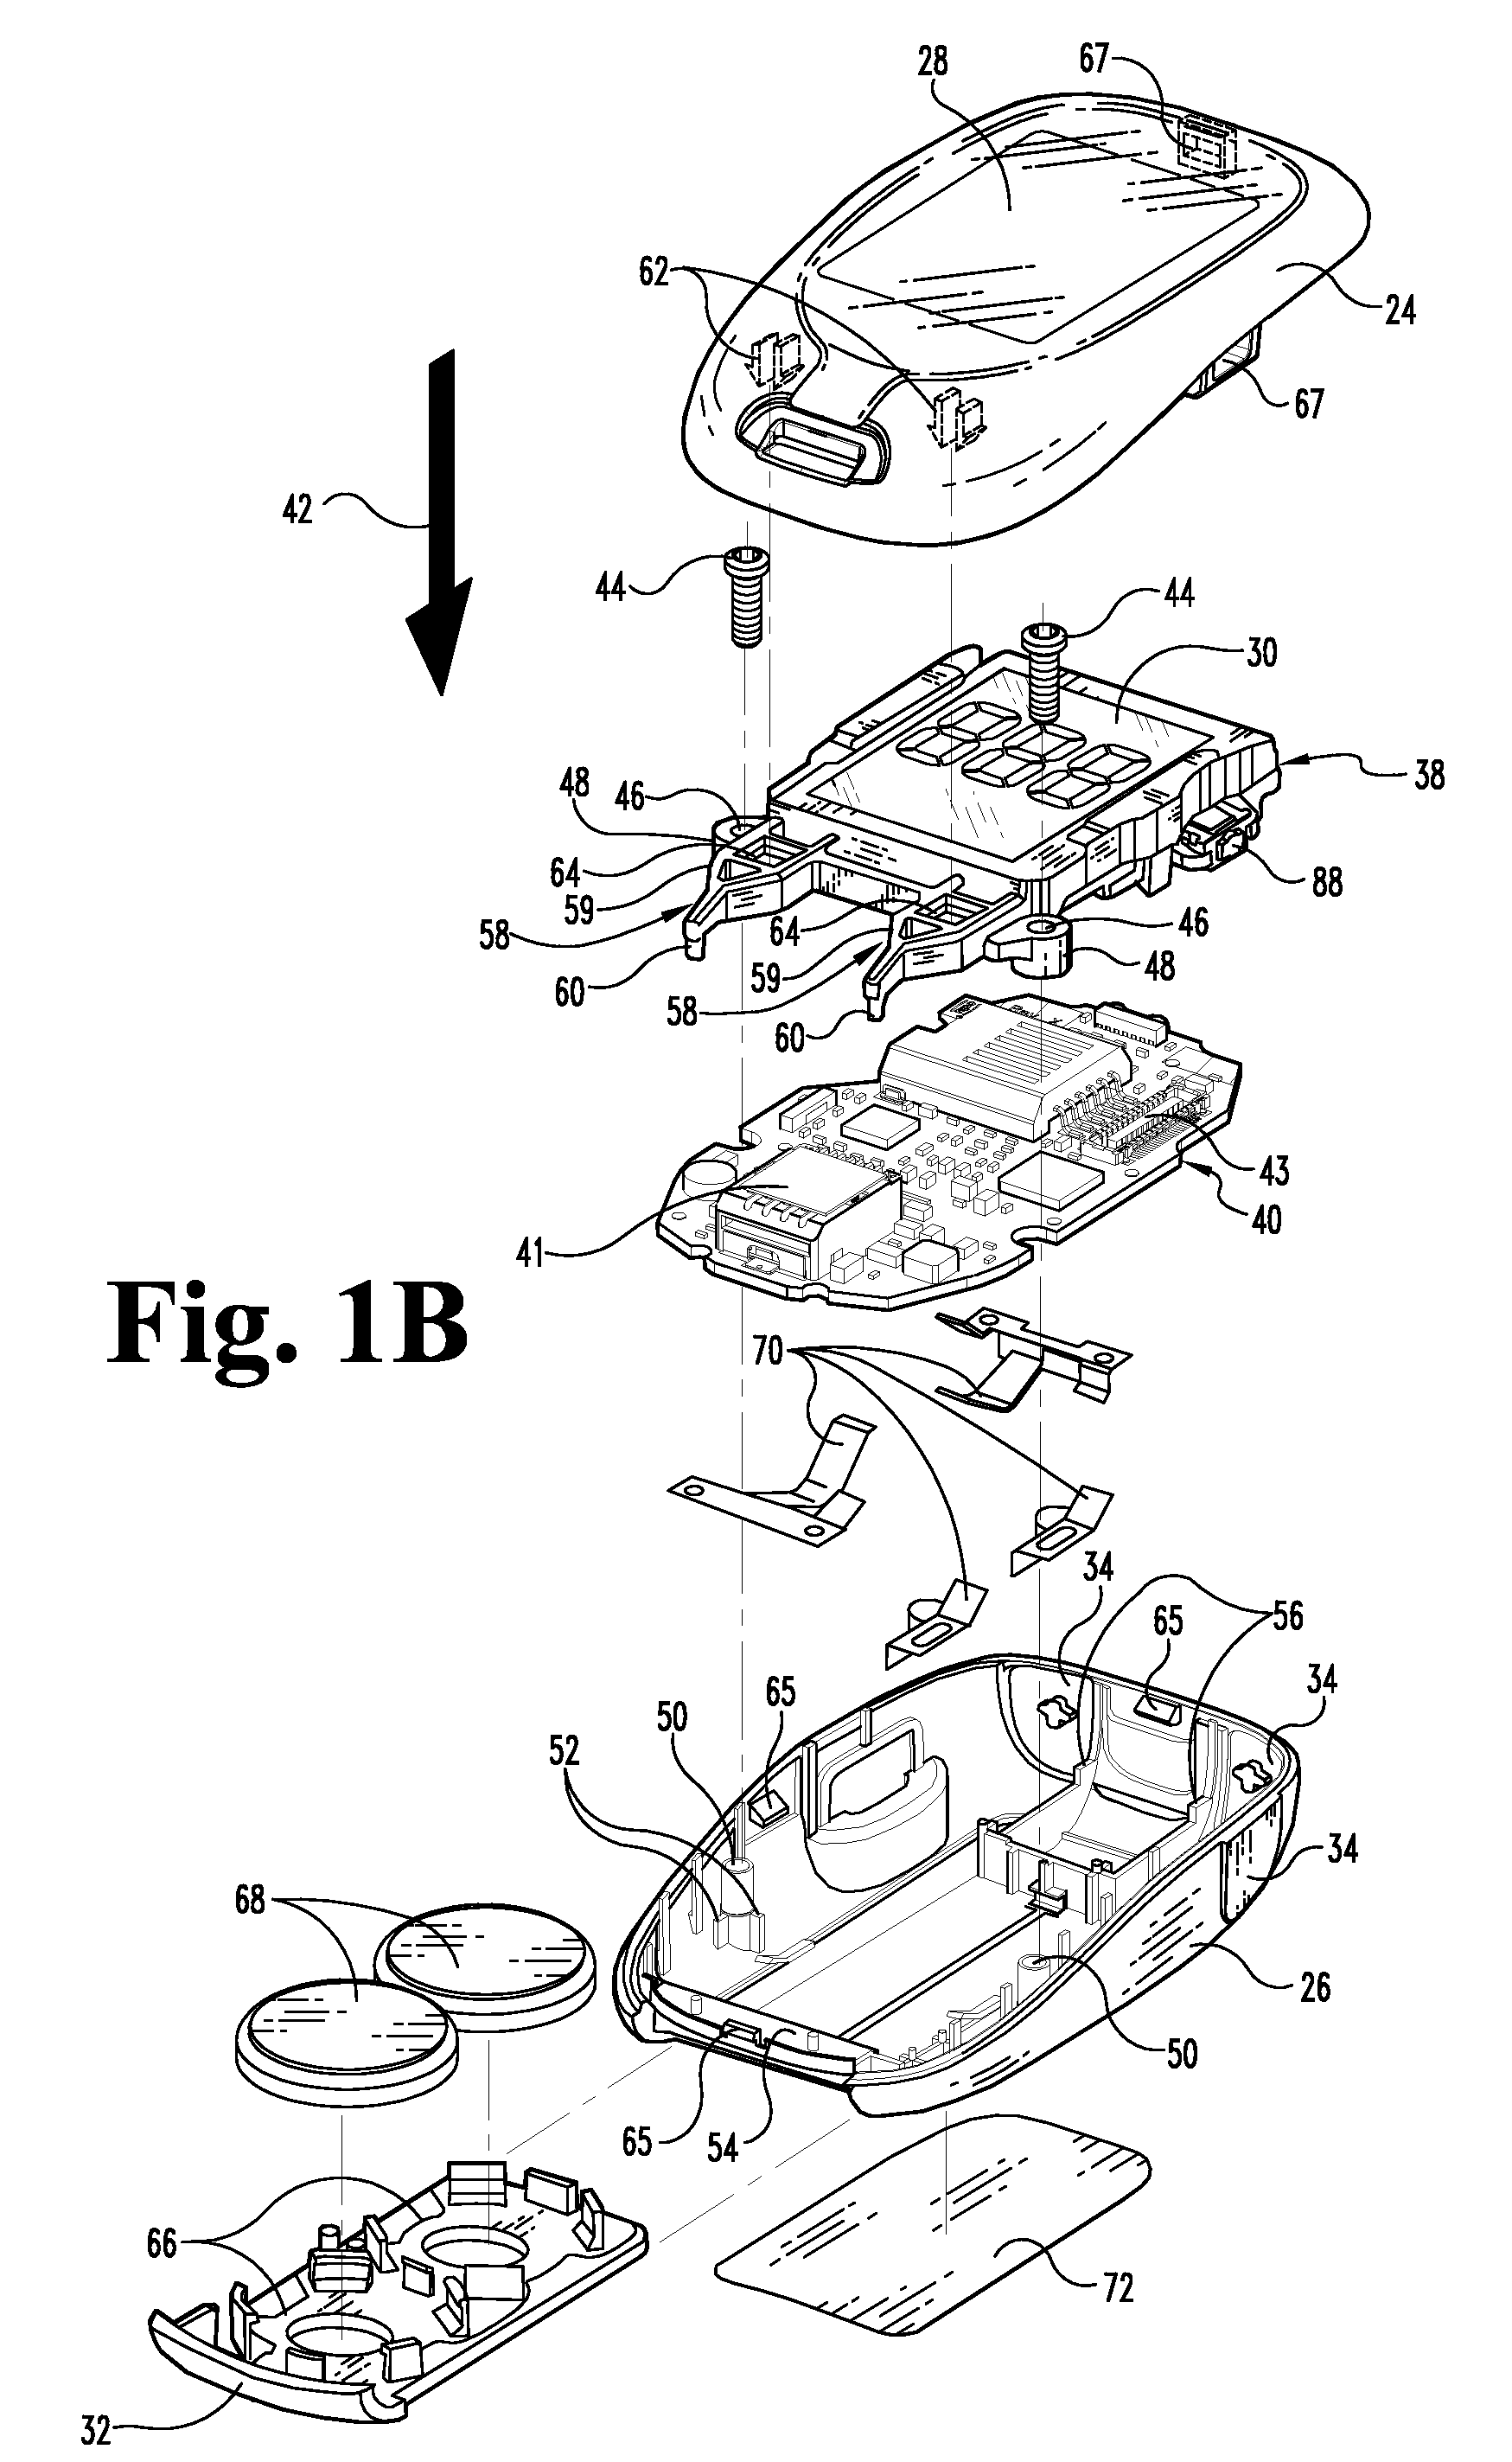 Diagnostic device with display module and leveraged component connections